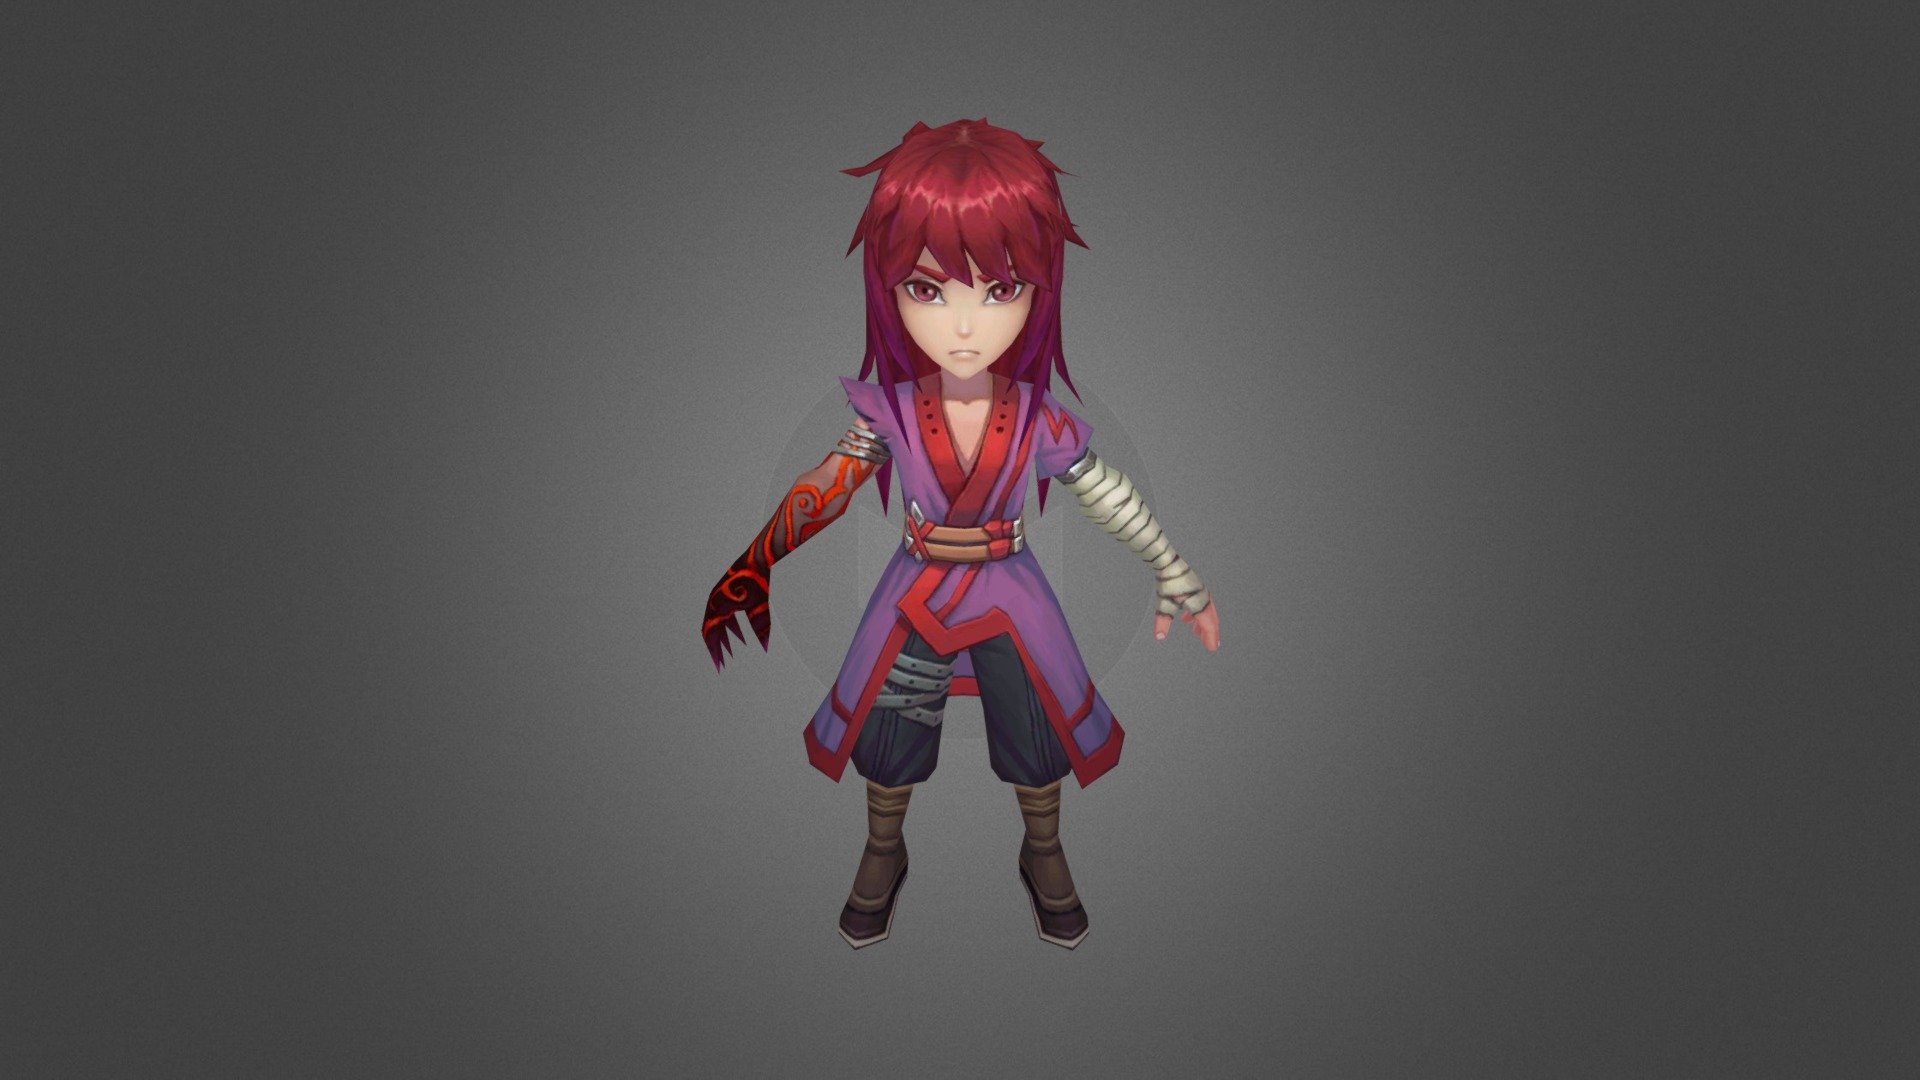 Download Chibi Demon Man 3D Model. You can use this model in real-time rendering, video games, cartoons, anime, and other CG arts.

Hope you like this model :)

For the list of full chibi characters pack, please take a look at https://cg-moon.com/product-tag/chibi/ - Chibi Demon Man 3D Model - Download Free 3D model by CG-Moon 3d model